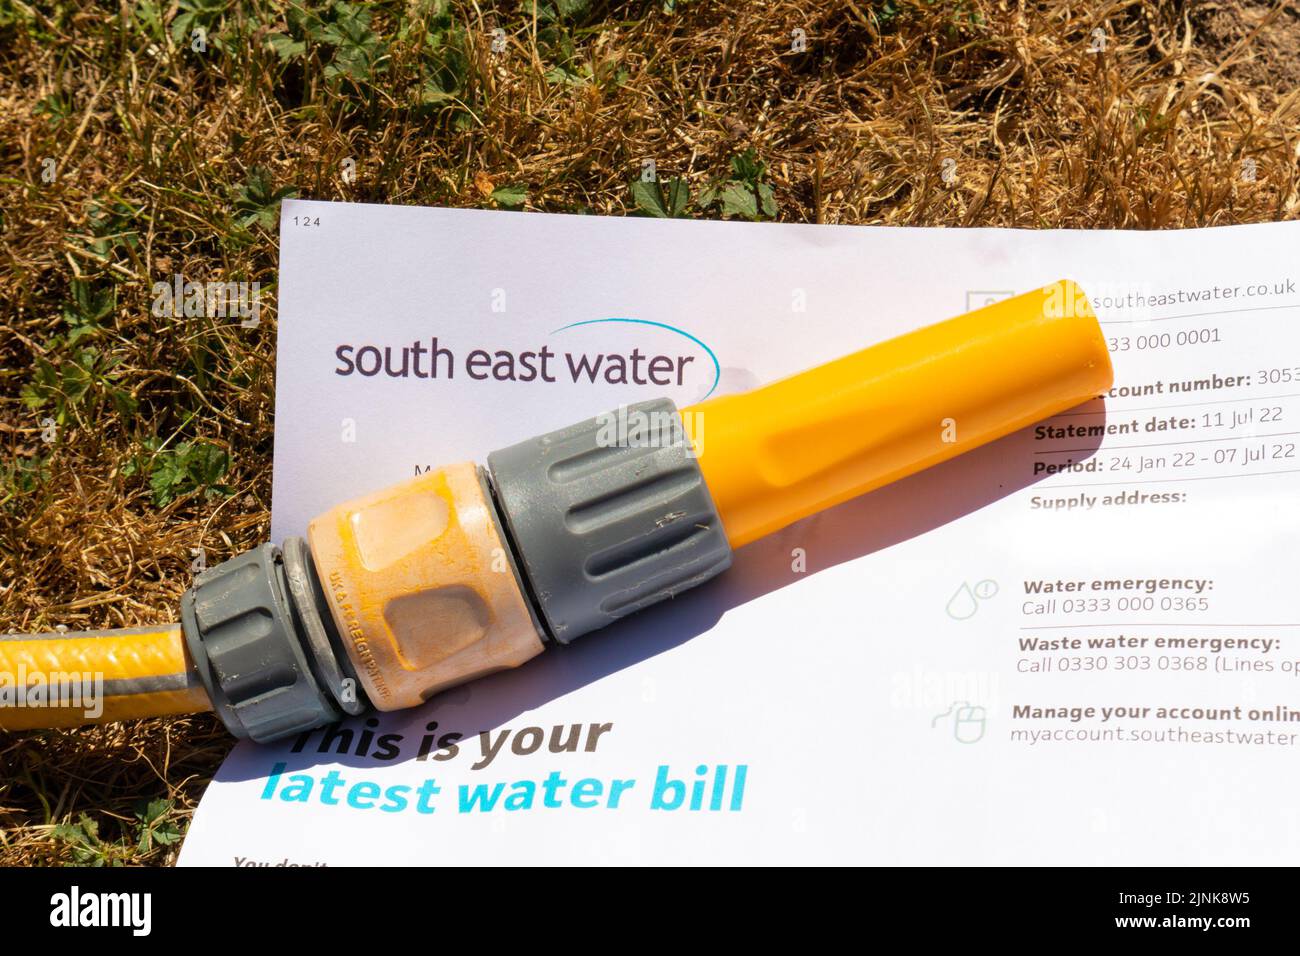 Ashford, Kent, UK. 12th Aug, 2022. Hosepipe ban in Kent, from Friday 00:01 the use of a hosepipe is banned by South East water who distribute water in the Kent area. NOTE: Address edited. Photo Credit: Paul Lawrenson/Alamy Live News Stock Photo